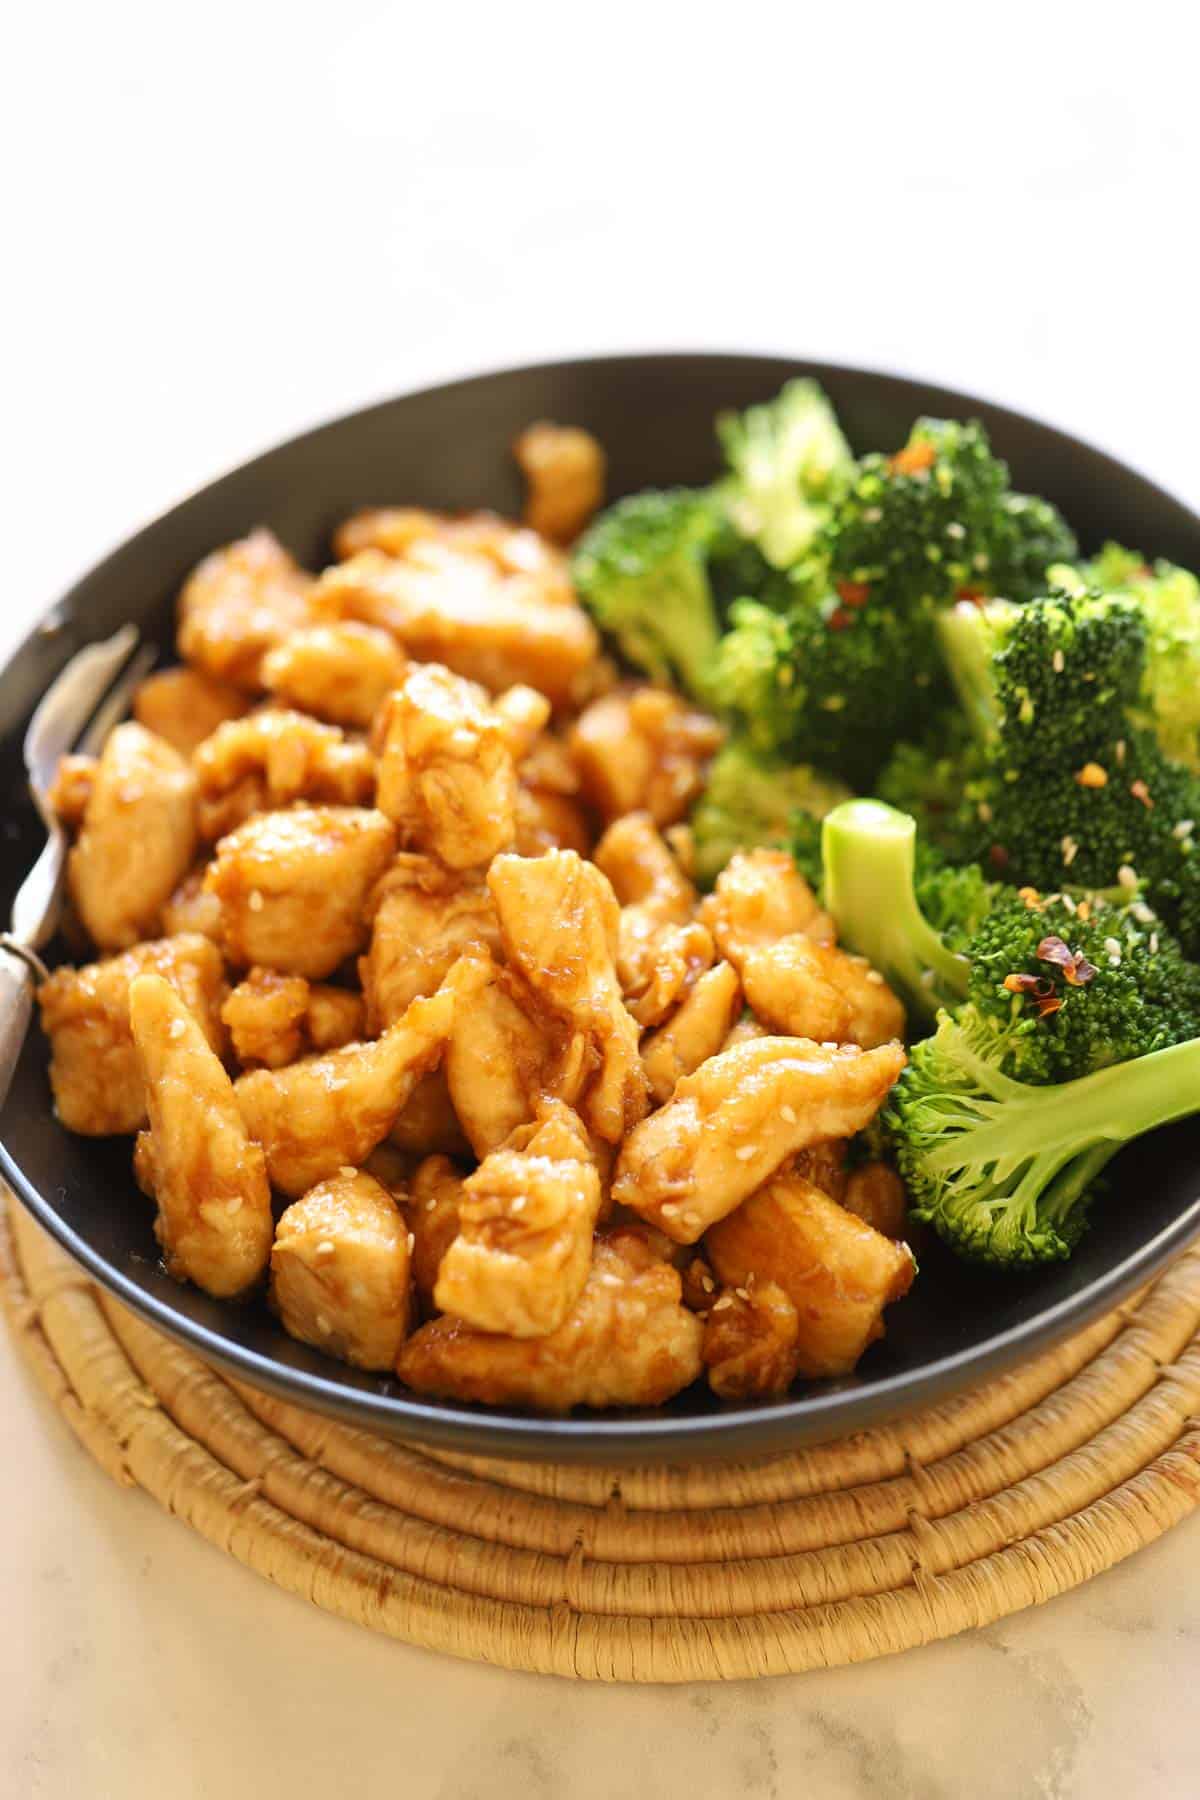 a bowl of stir fried chicken and broccoli